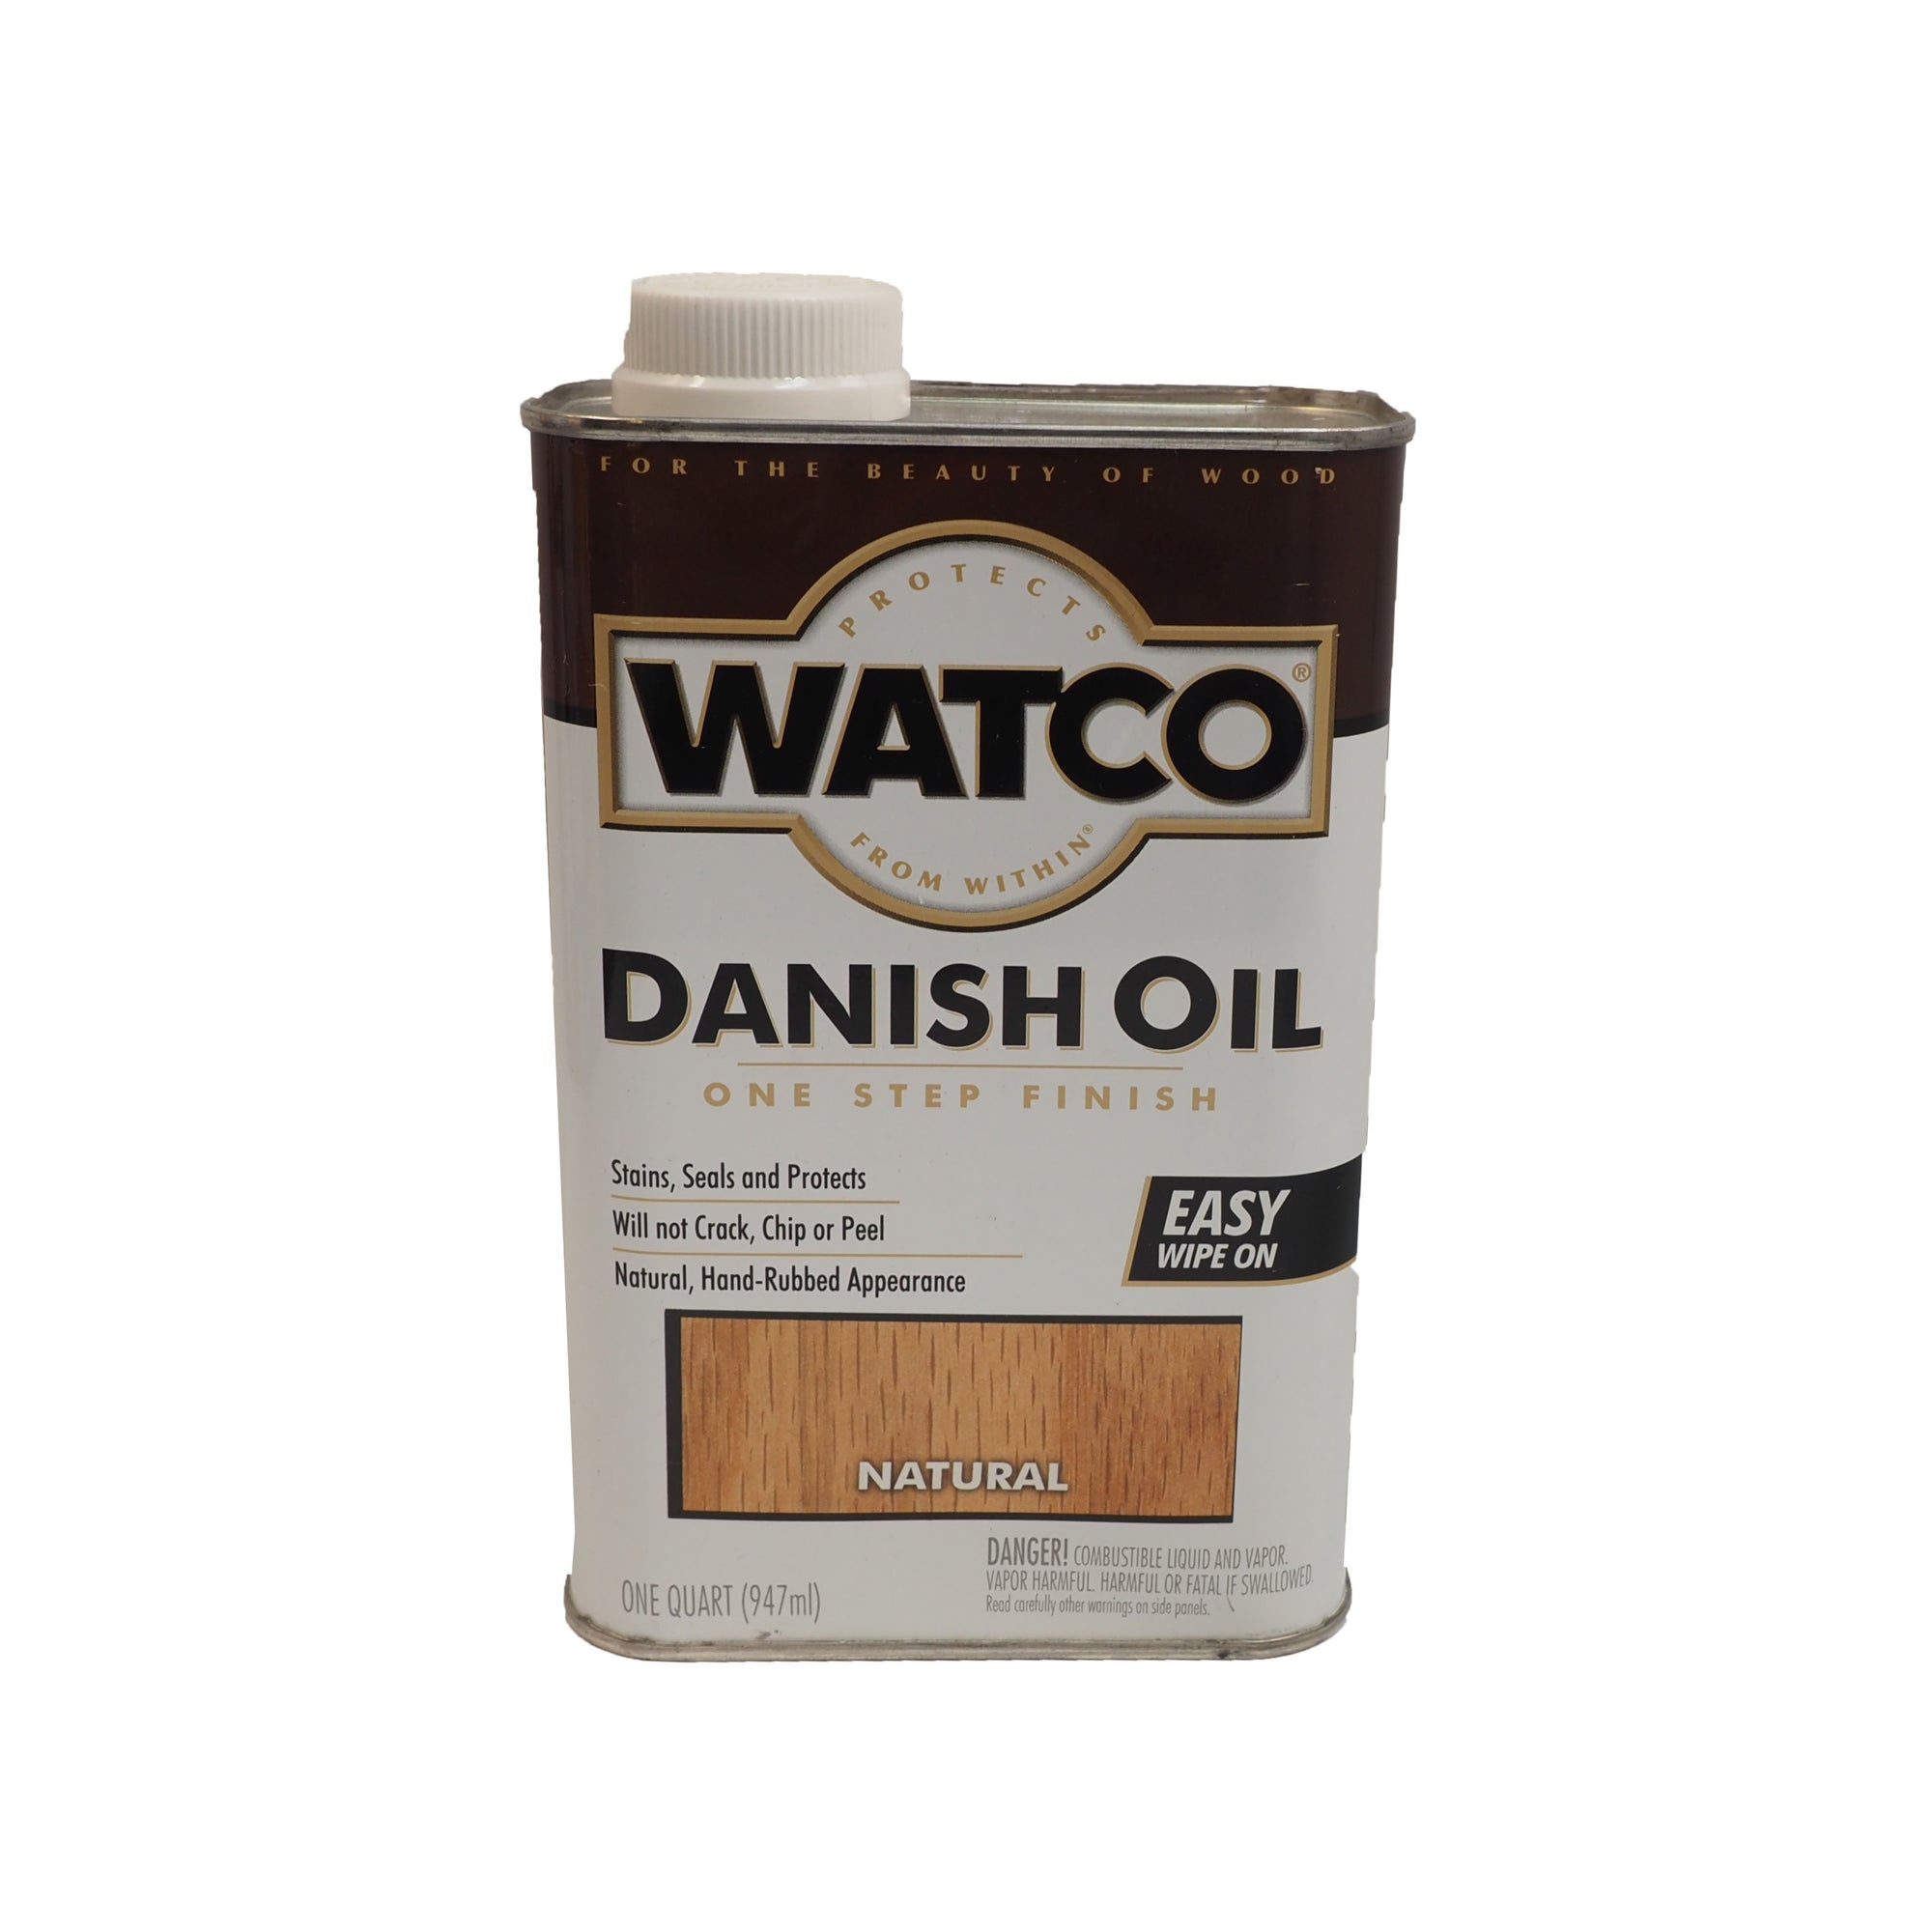 Watco Danish Oil, available at Catalina Paints in CA.